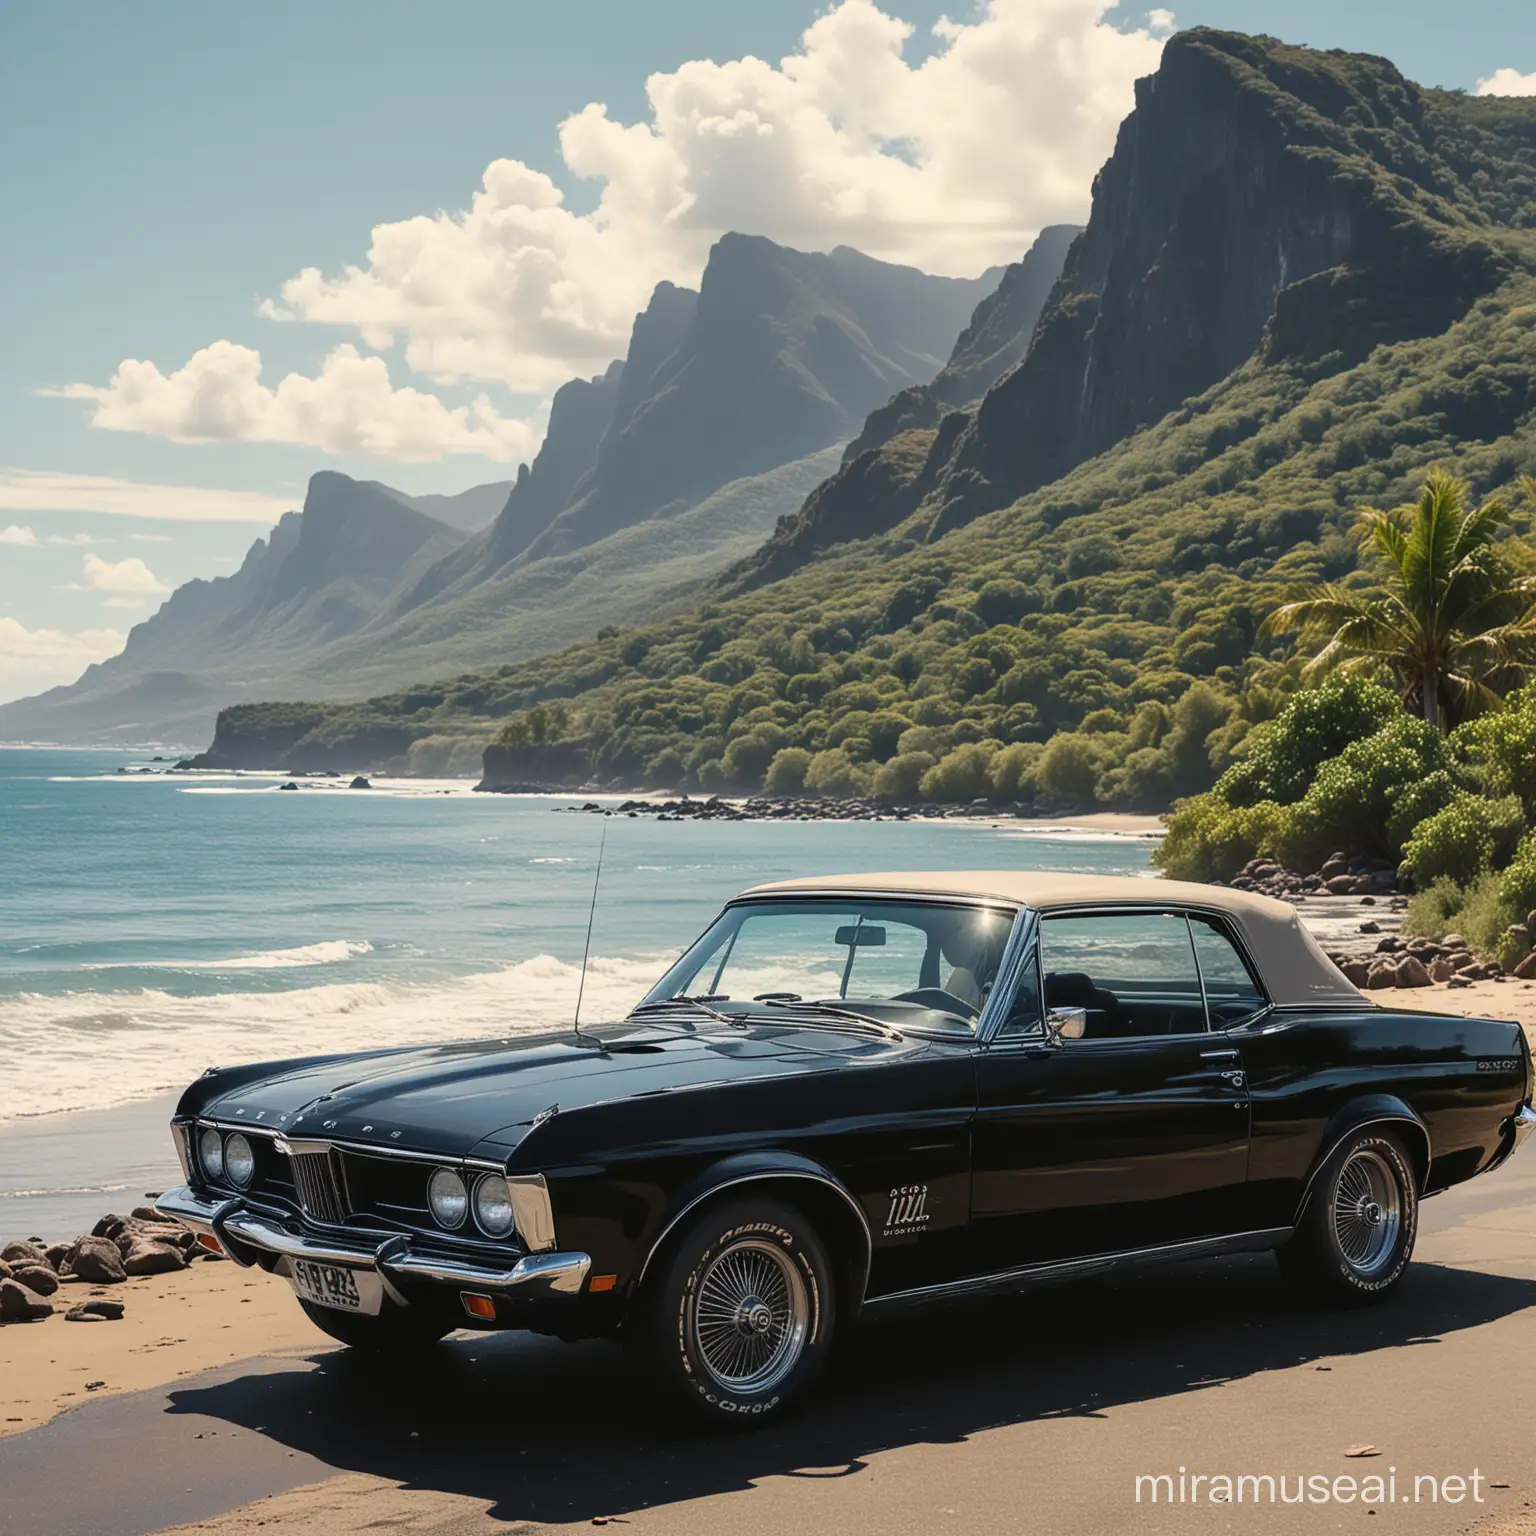 Classic Black Cougar Muscle Car Parked in Tropical Beach Landscape